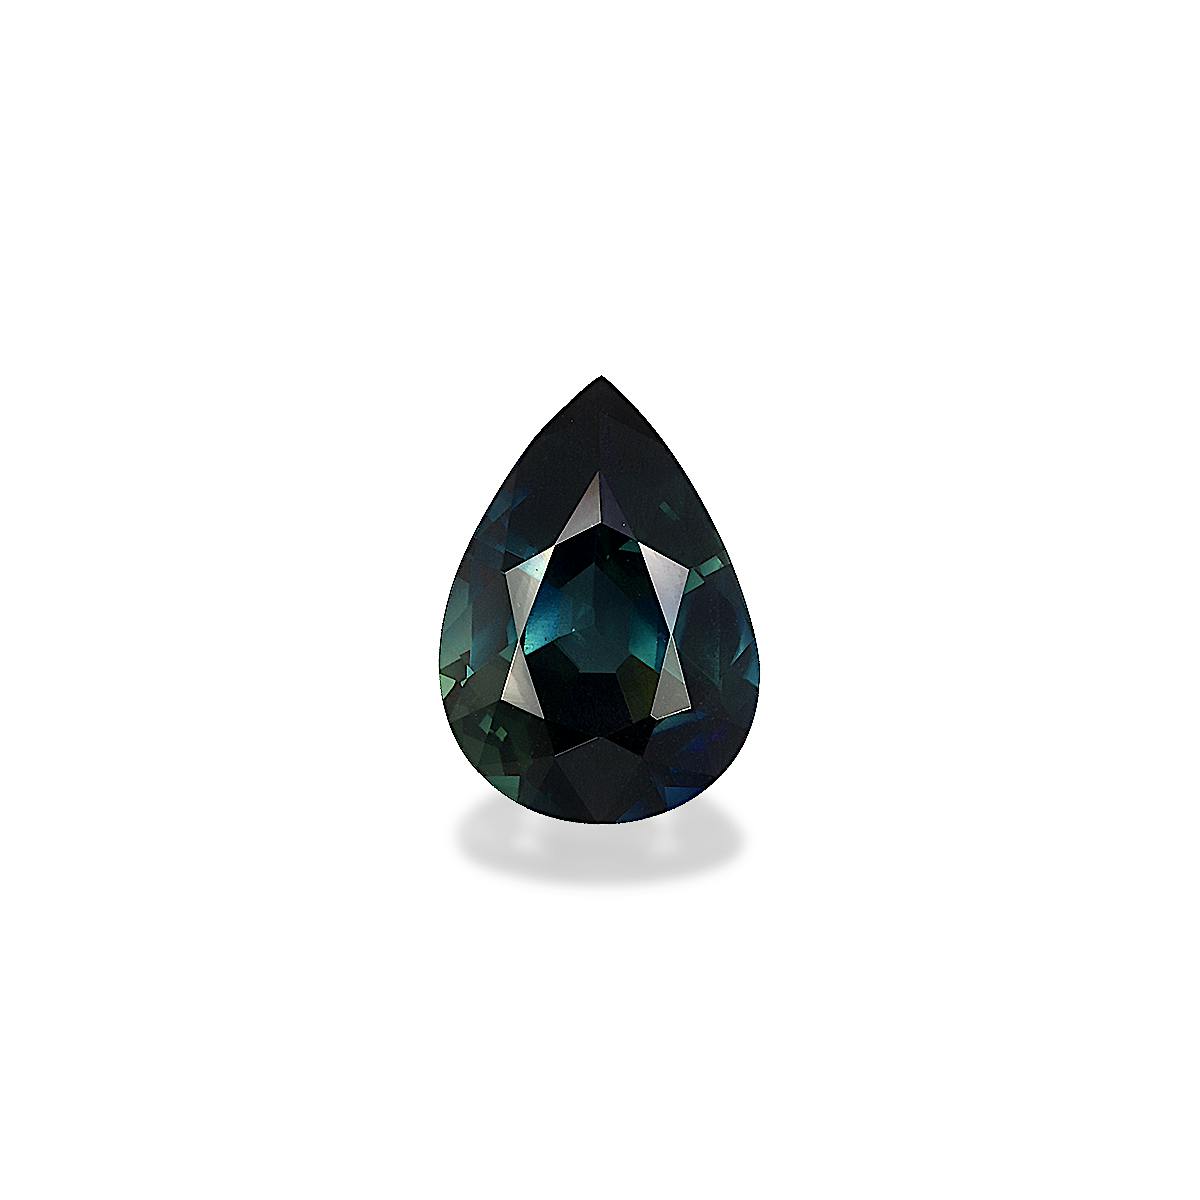 Blue Teal Sapphire 1.94ct - Main Image